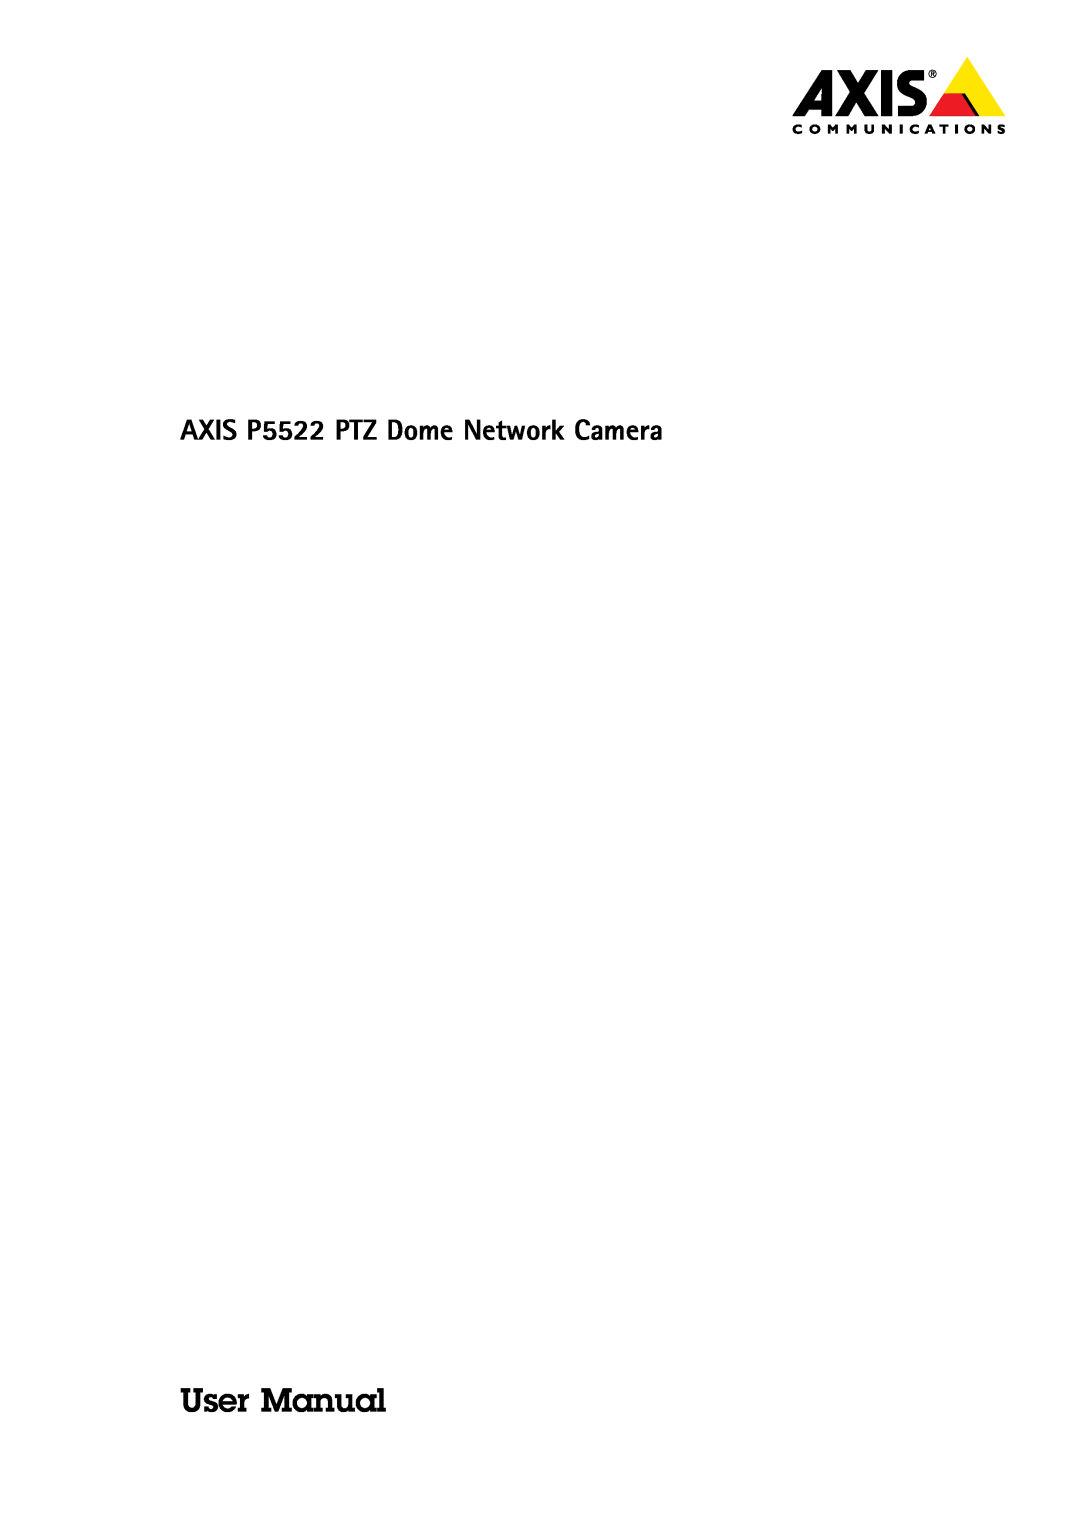 Axis Communications user manual User Manual, AXIS P5522 PTZ Dome Network Camera 